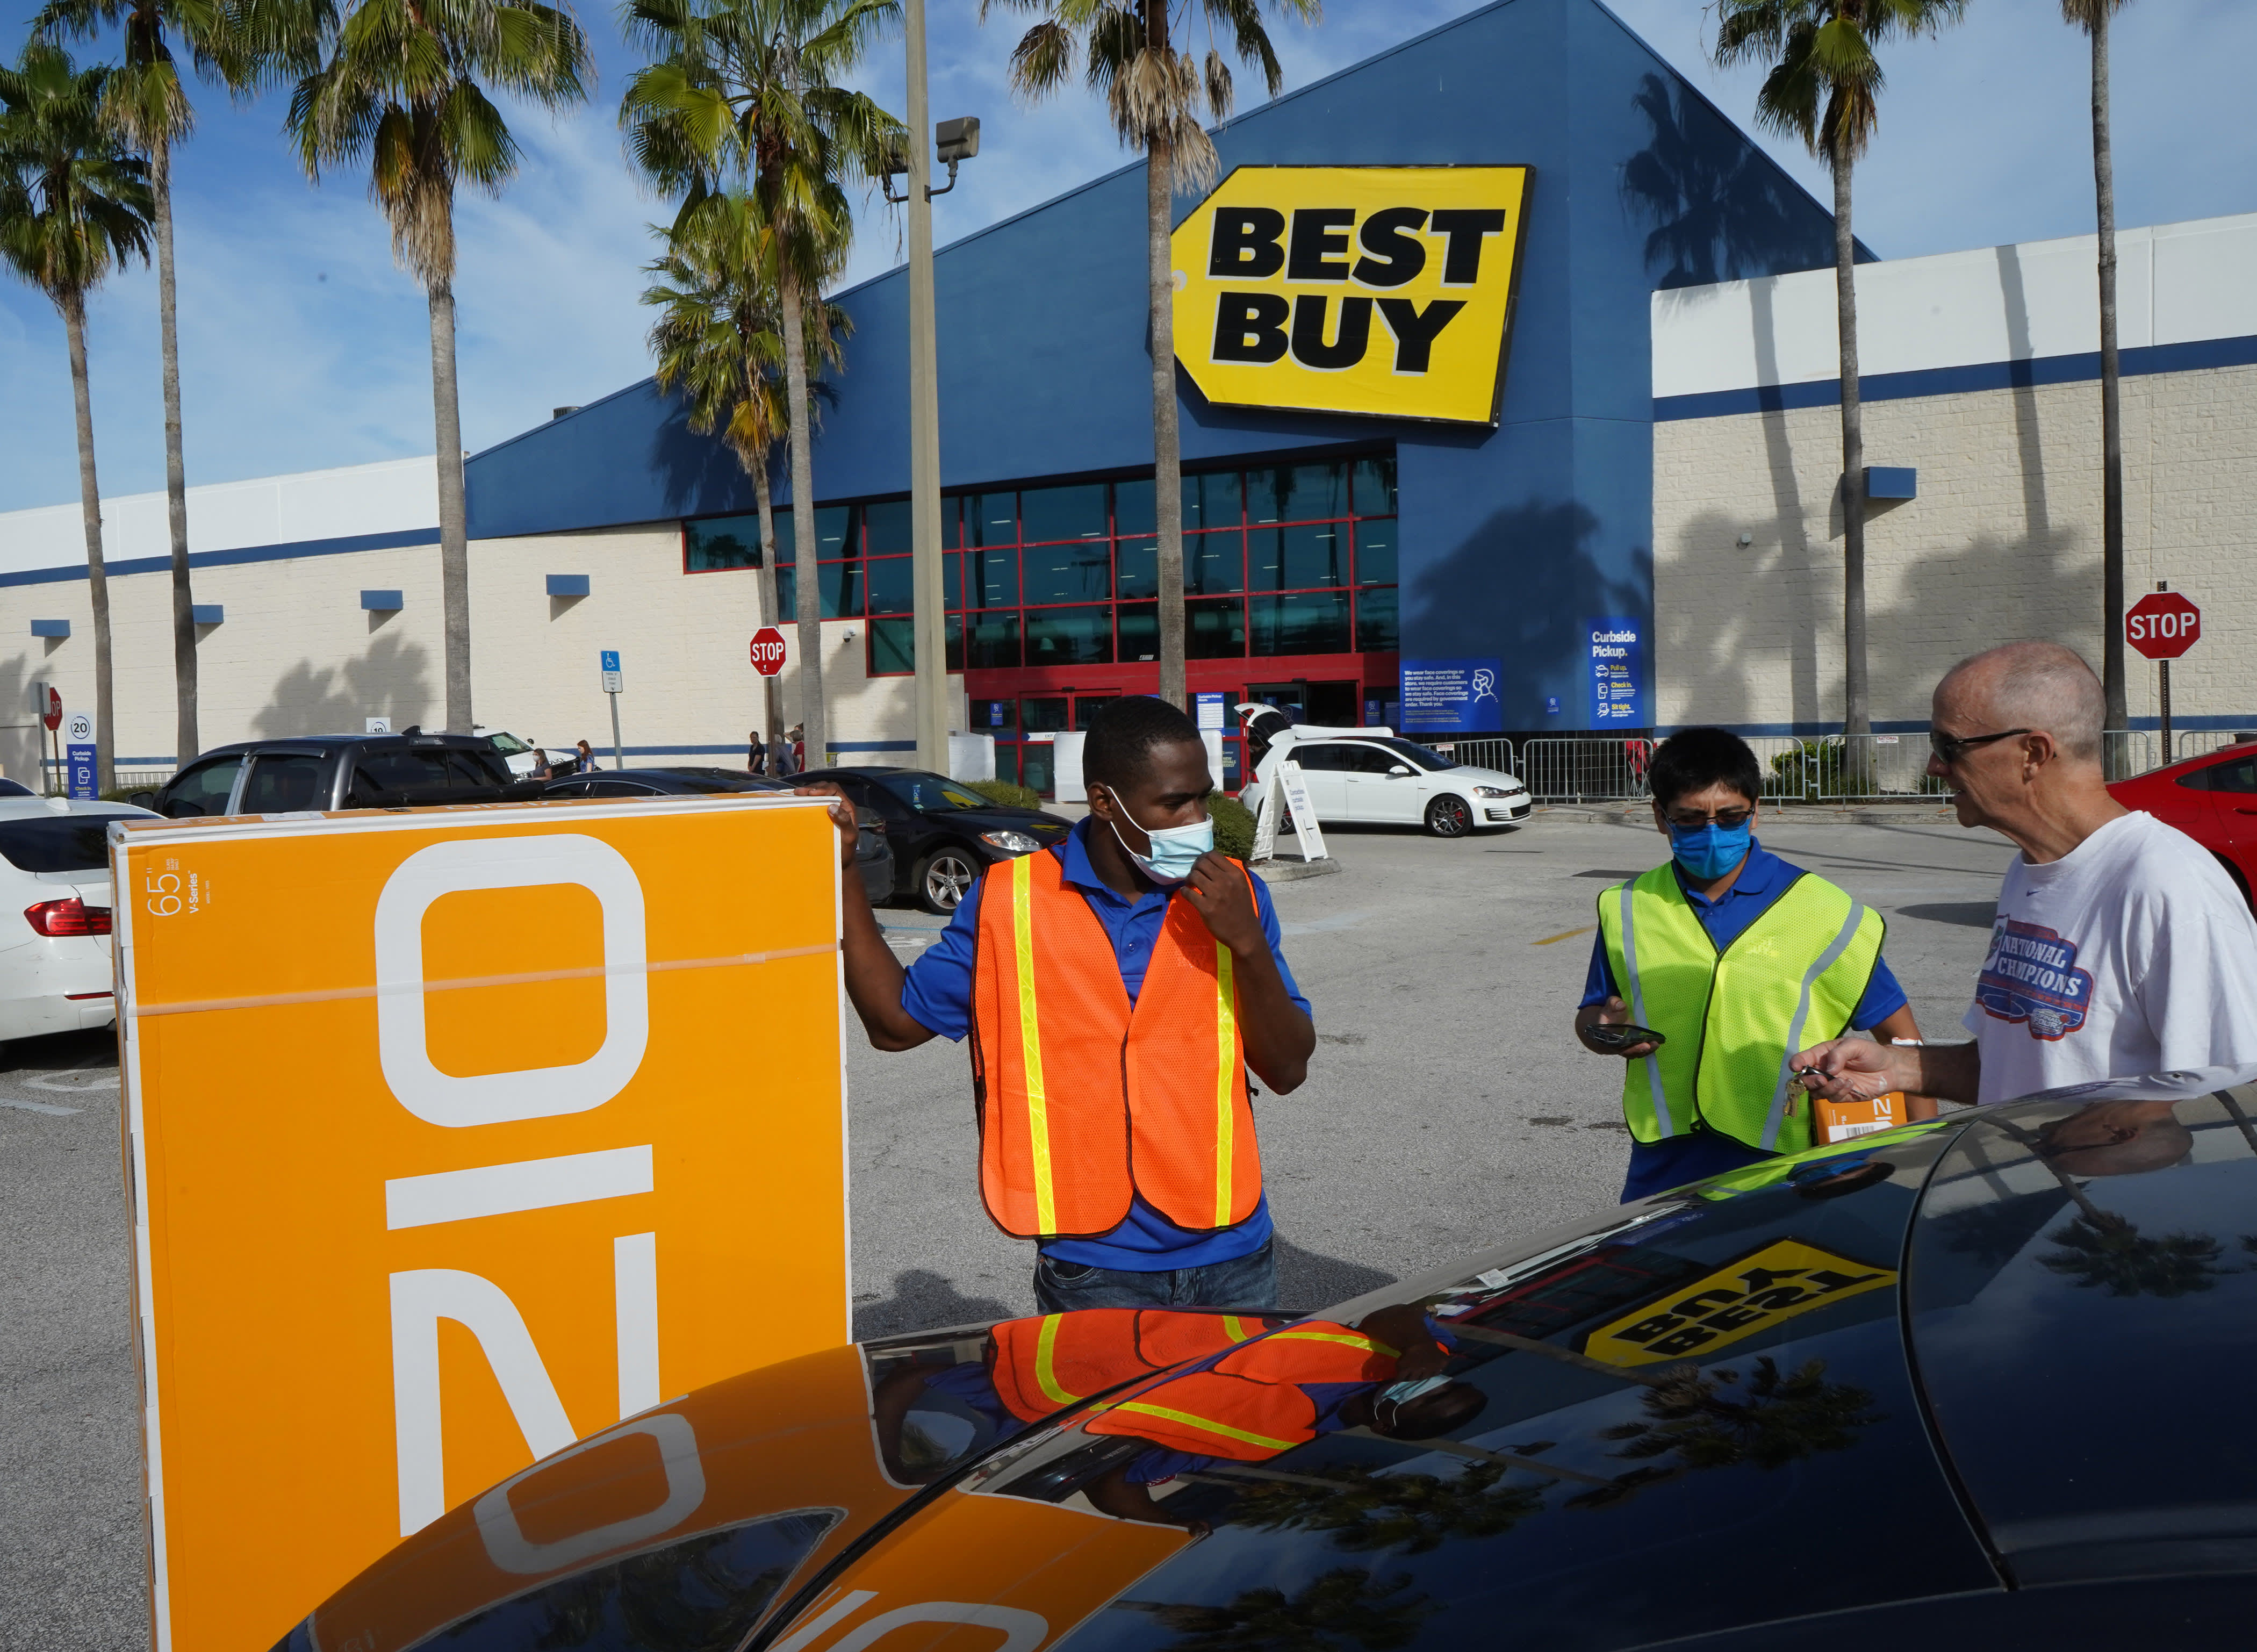 Best Buy brackets for opponents to lower prices as demand fueled by pandemics fades